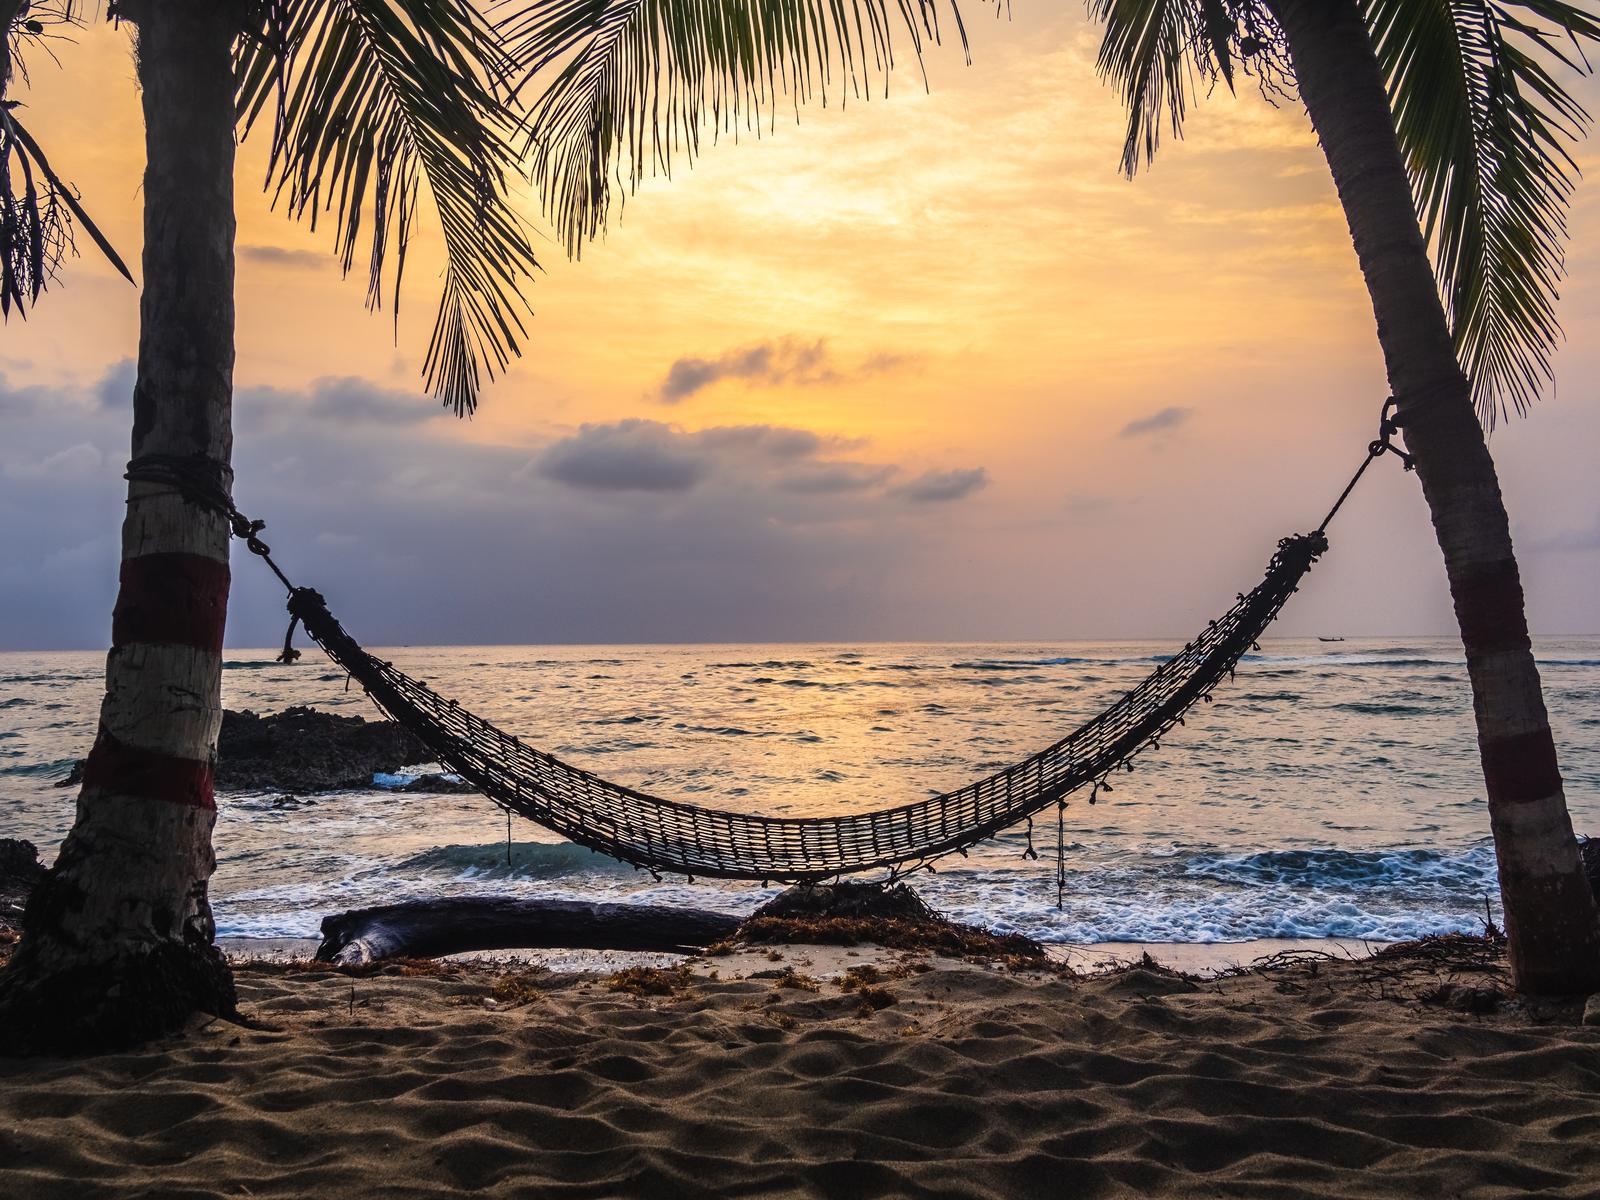 What Landscape Are You? Quiz Hammock at beach